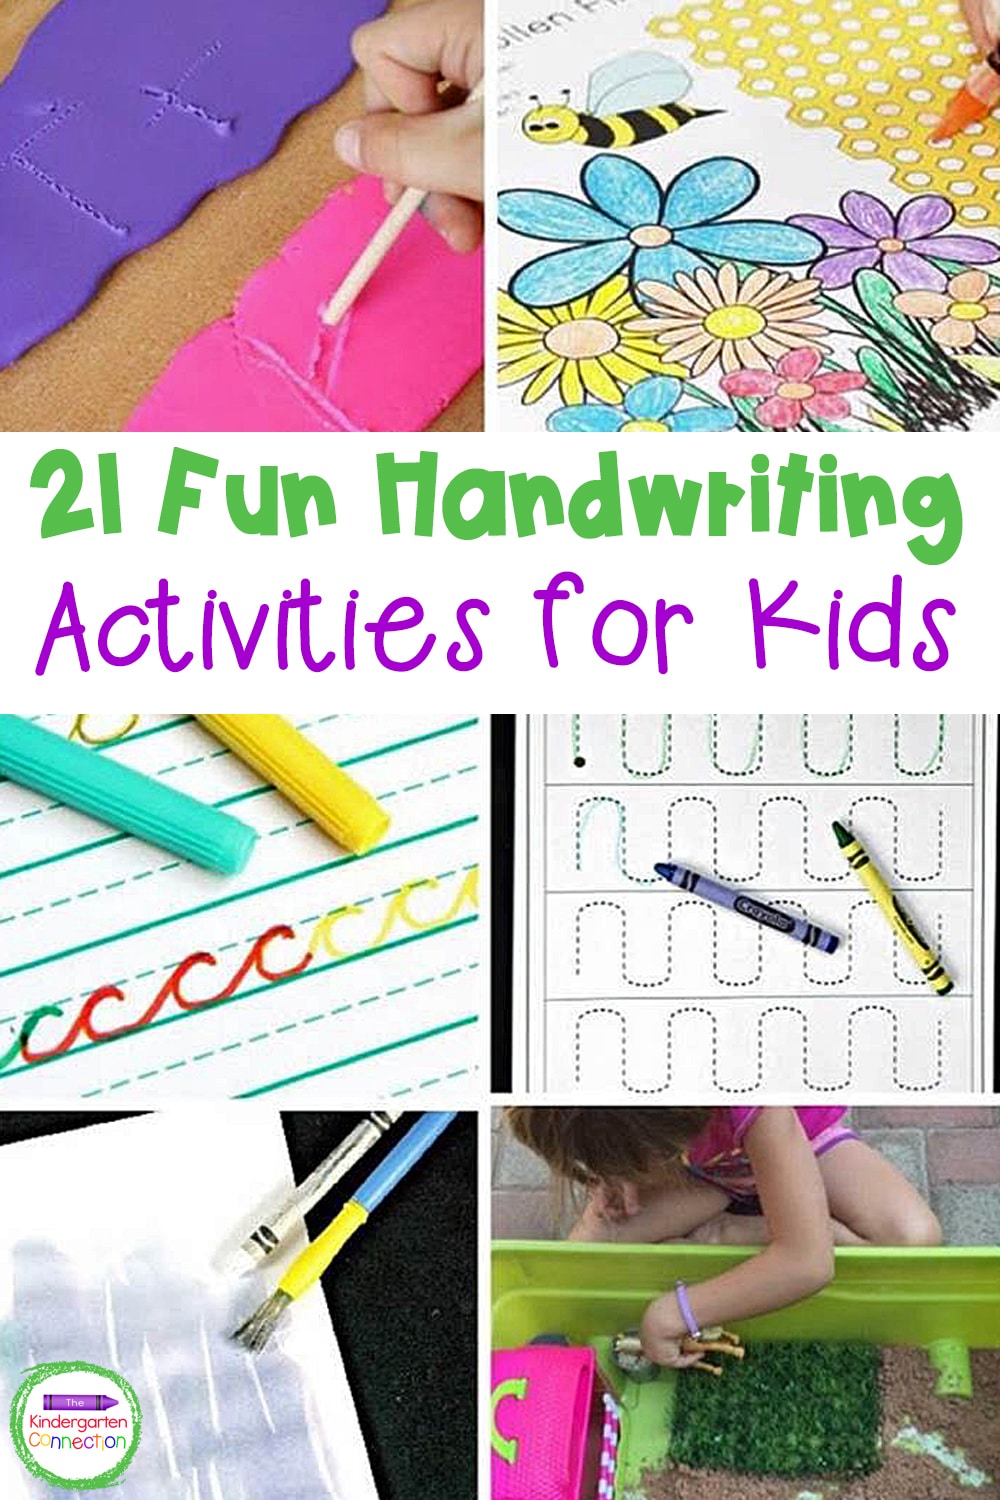 If you're teaching writing or working on general handwriting skills, these 21 handwriting activities for kids are great to add to your plans!